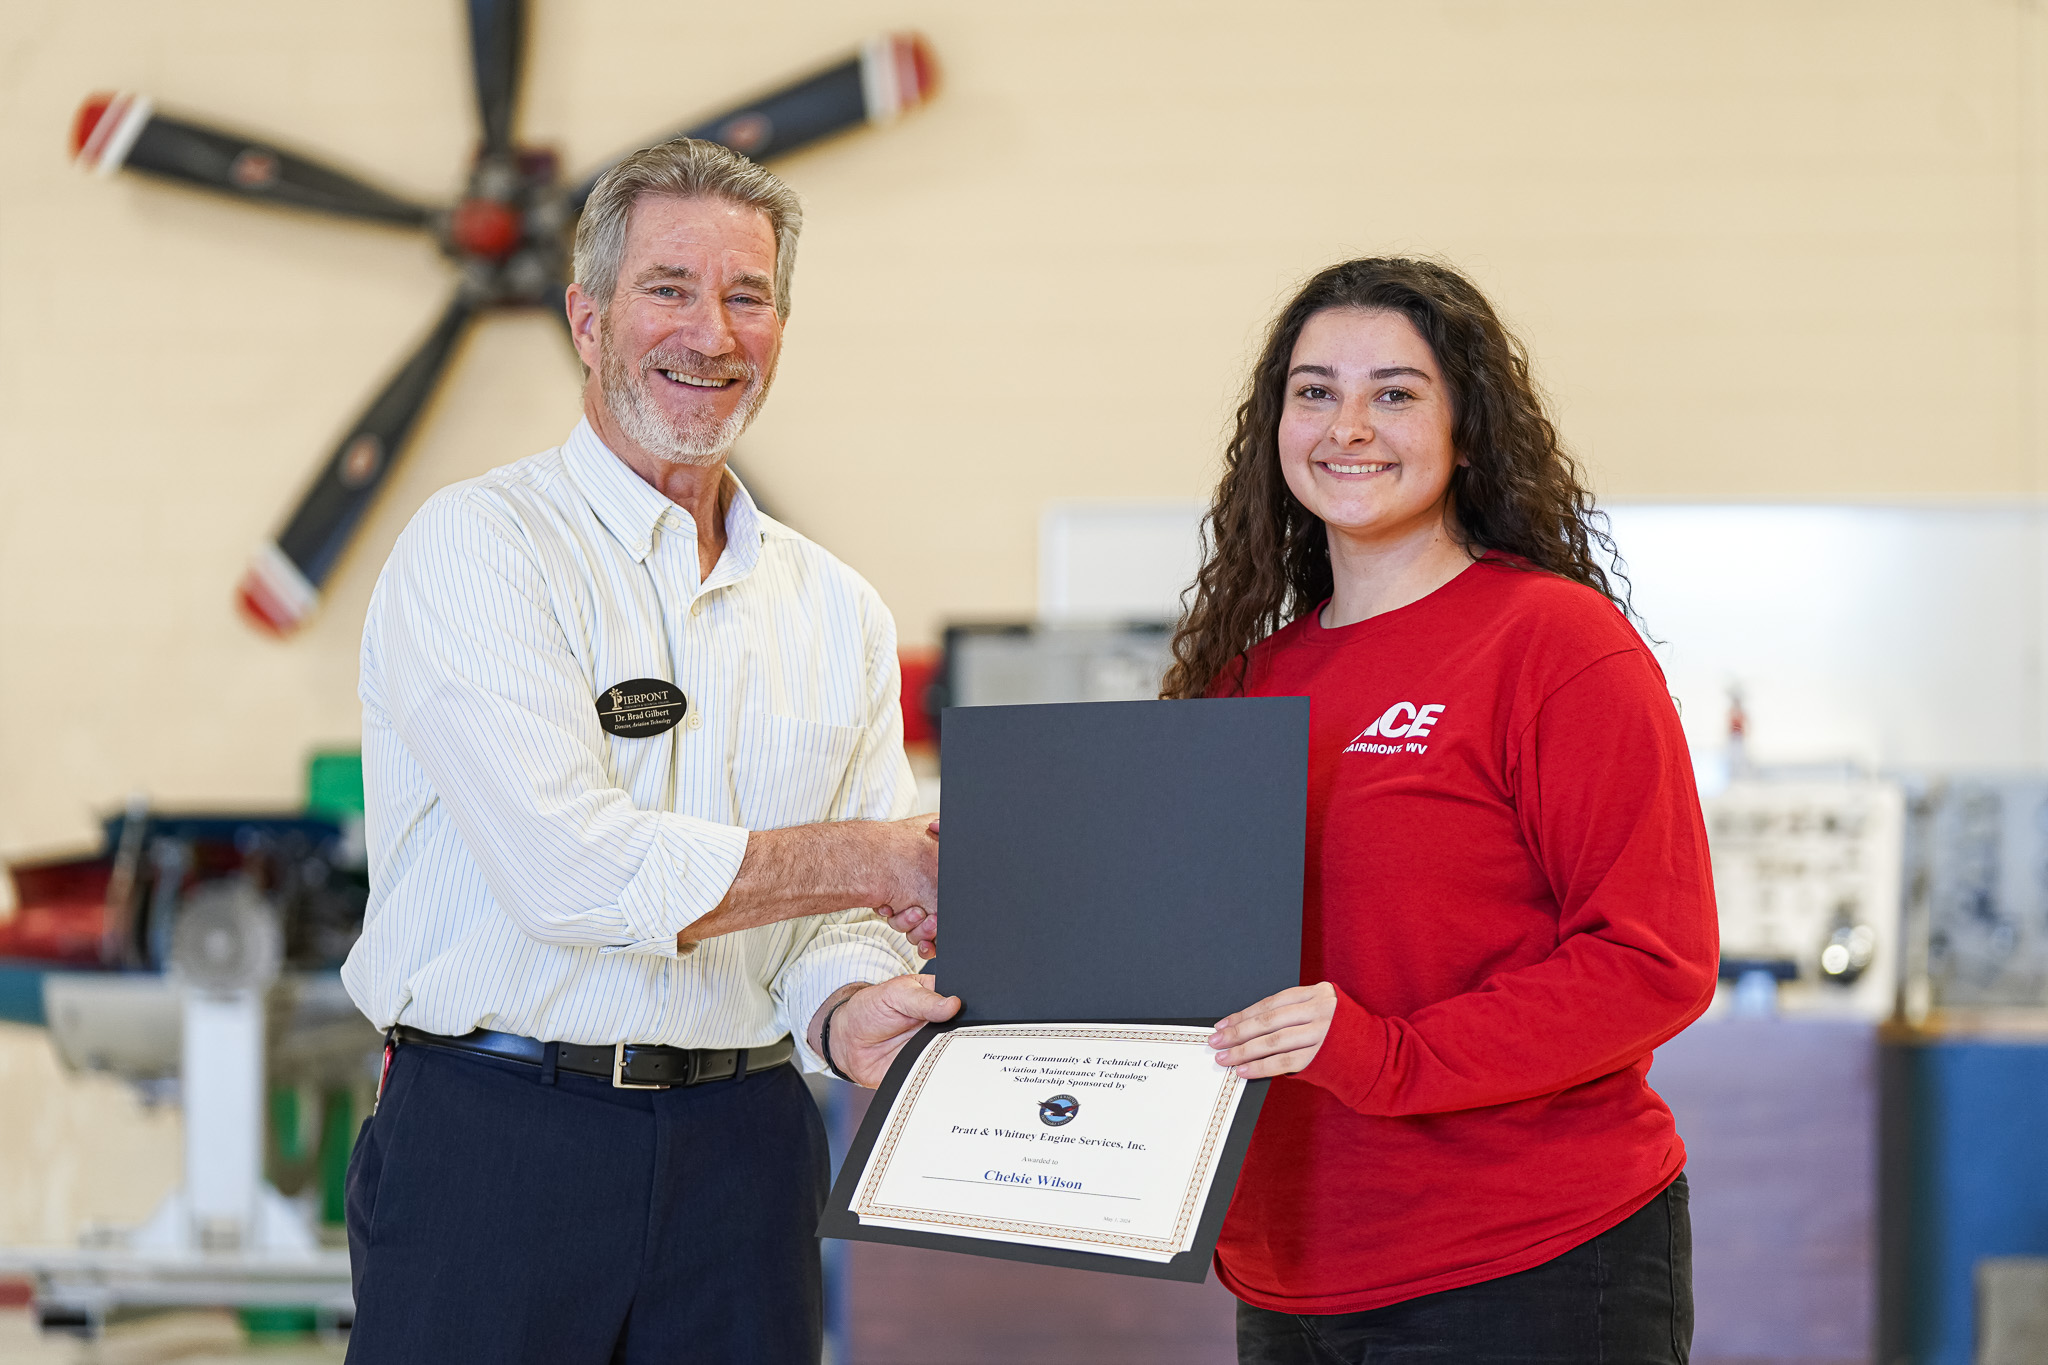 A student is pictured with Dr. Brad Gilbert accepting a scholarship certificate.